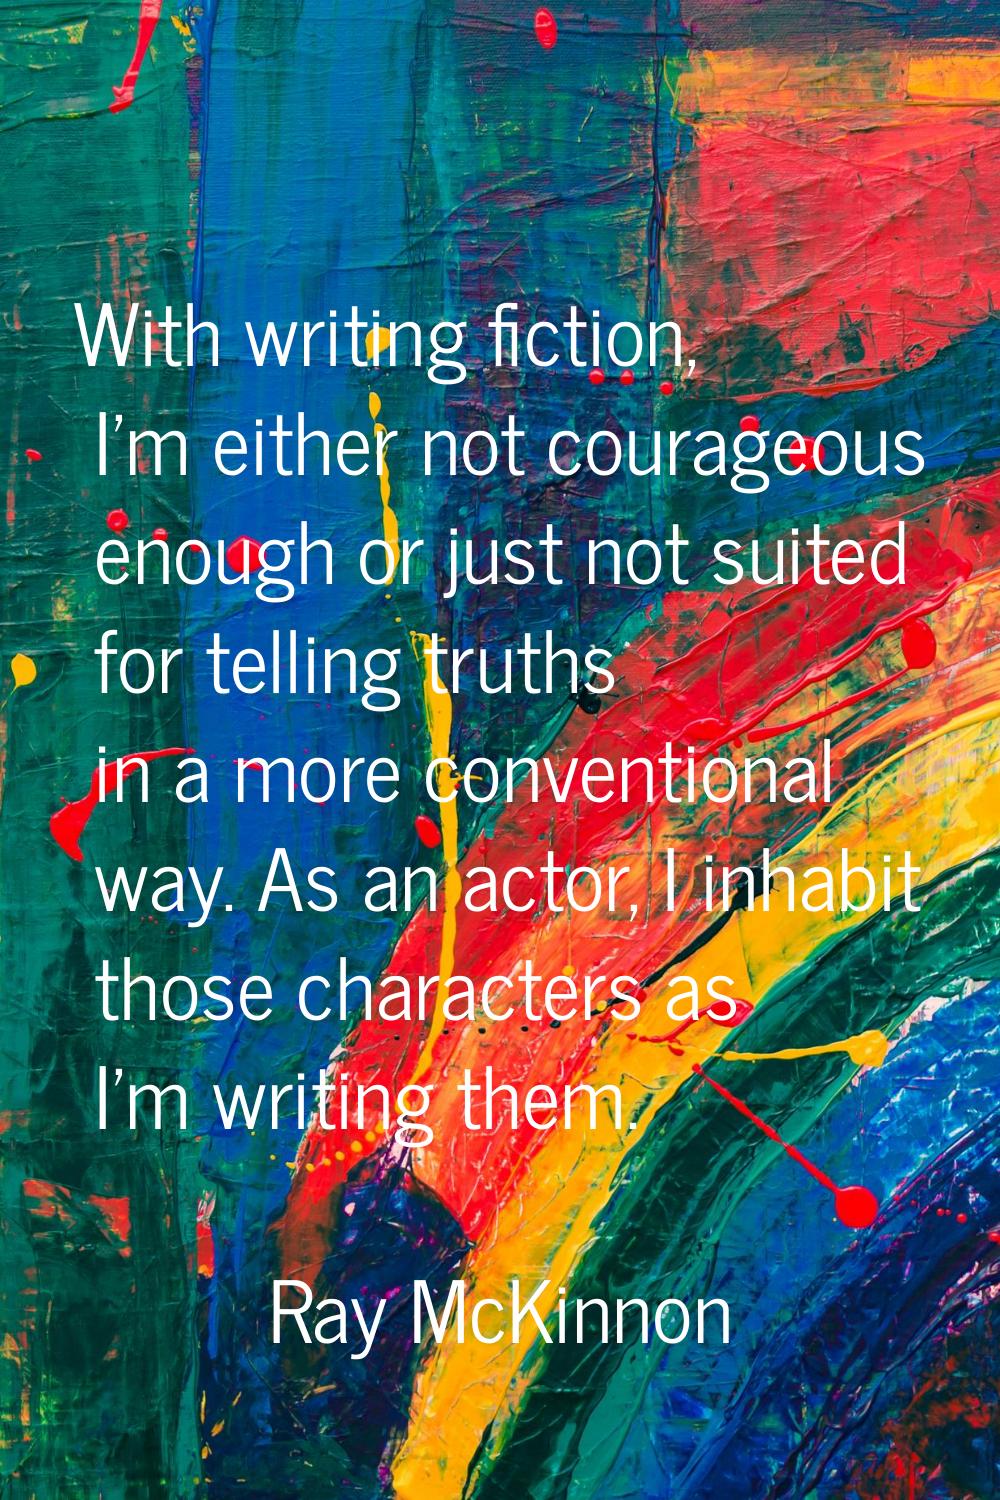 With writing fiction, I'm either not courageous enough or just not suited for telling truths in a m